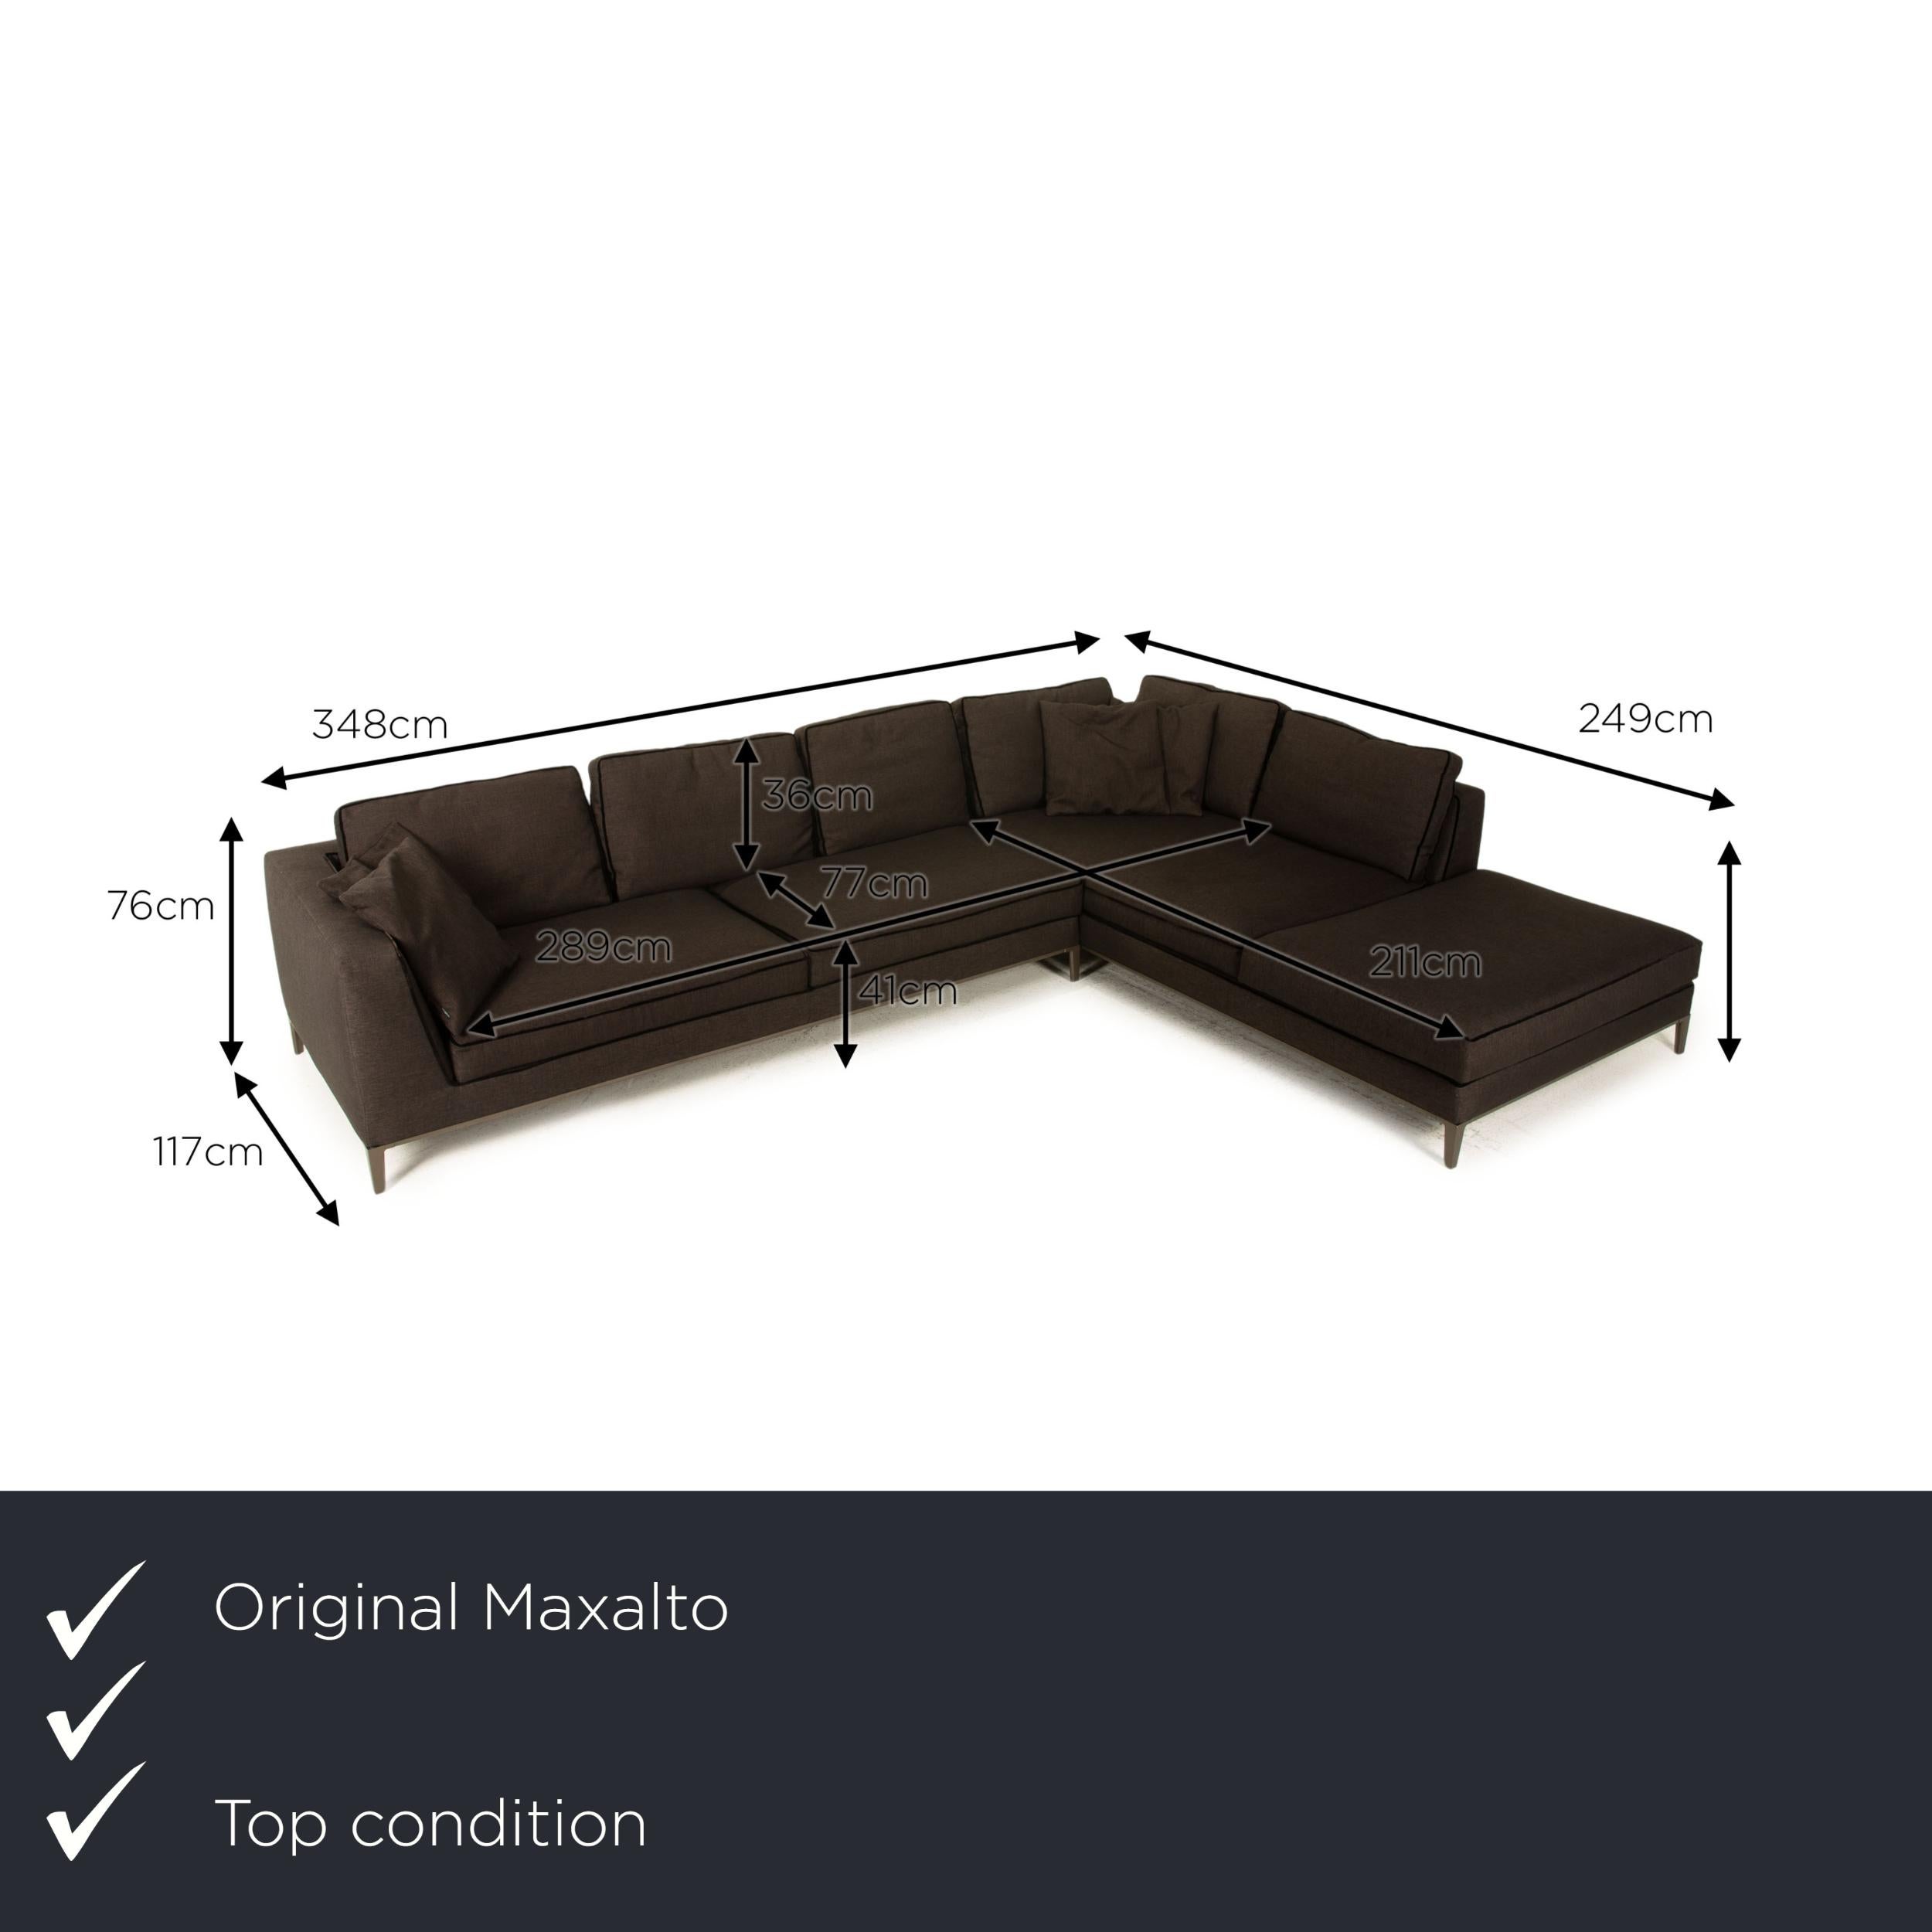 We present to you a Maxalto Lucrezia fabric sofa gray corner sofa couch.
 

 Product measurements in centimeters:
 

Depth: 117
Width: 249
Height: 76
Seat height: 41
Rest height: 65
Seat depth: 77
Seat width: 211
Back height: 36.
 